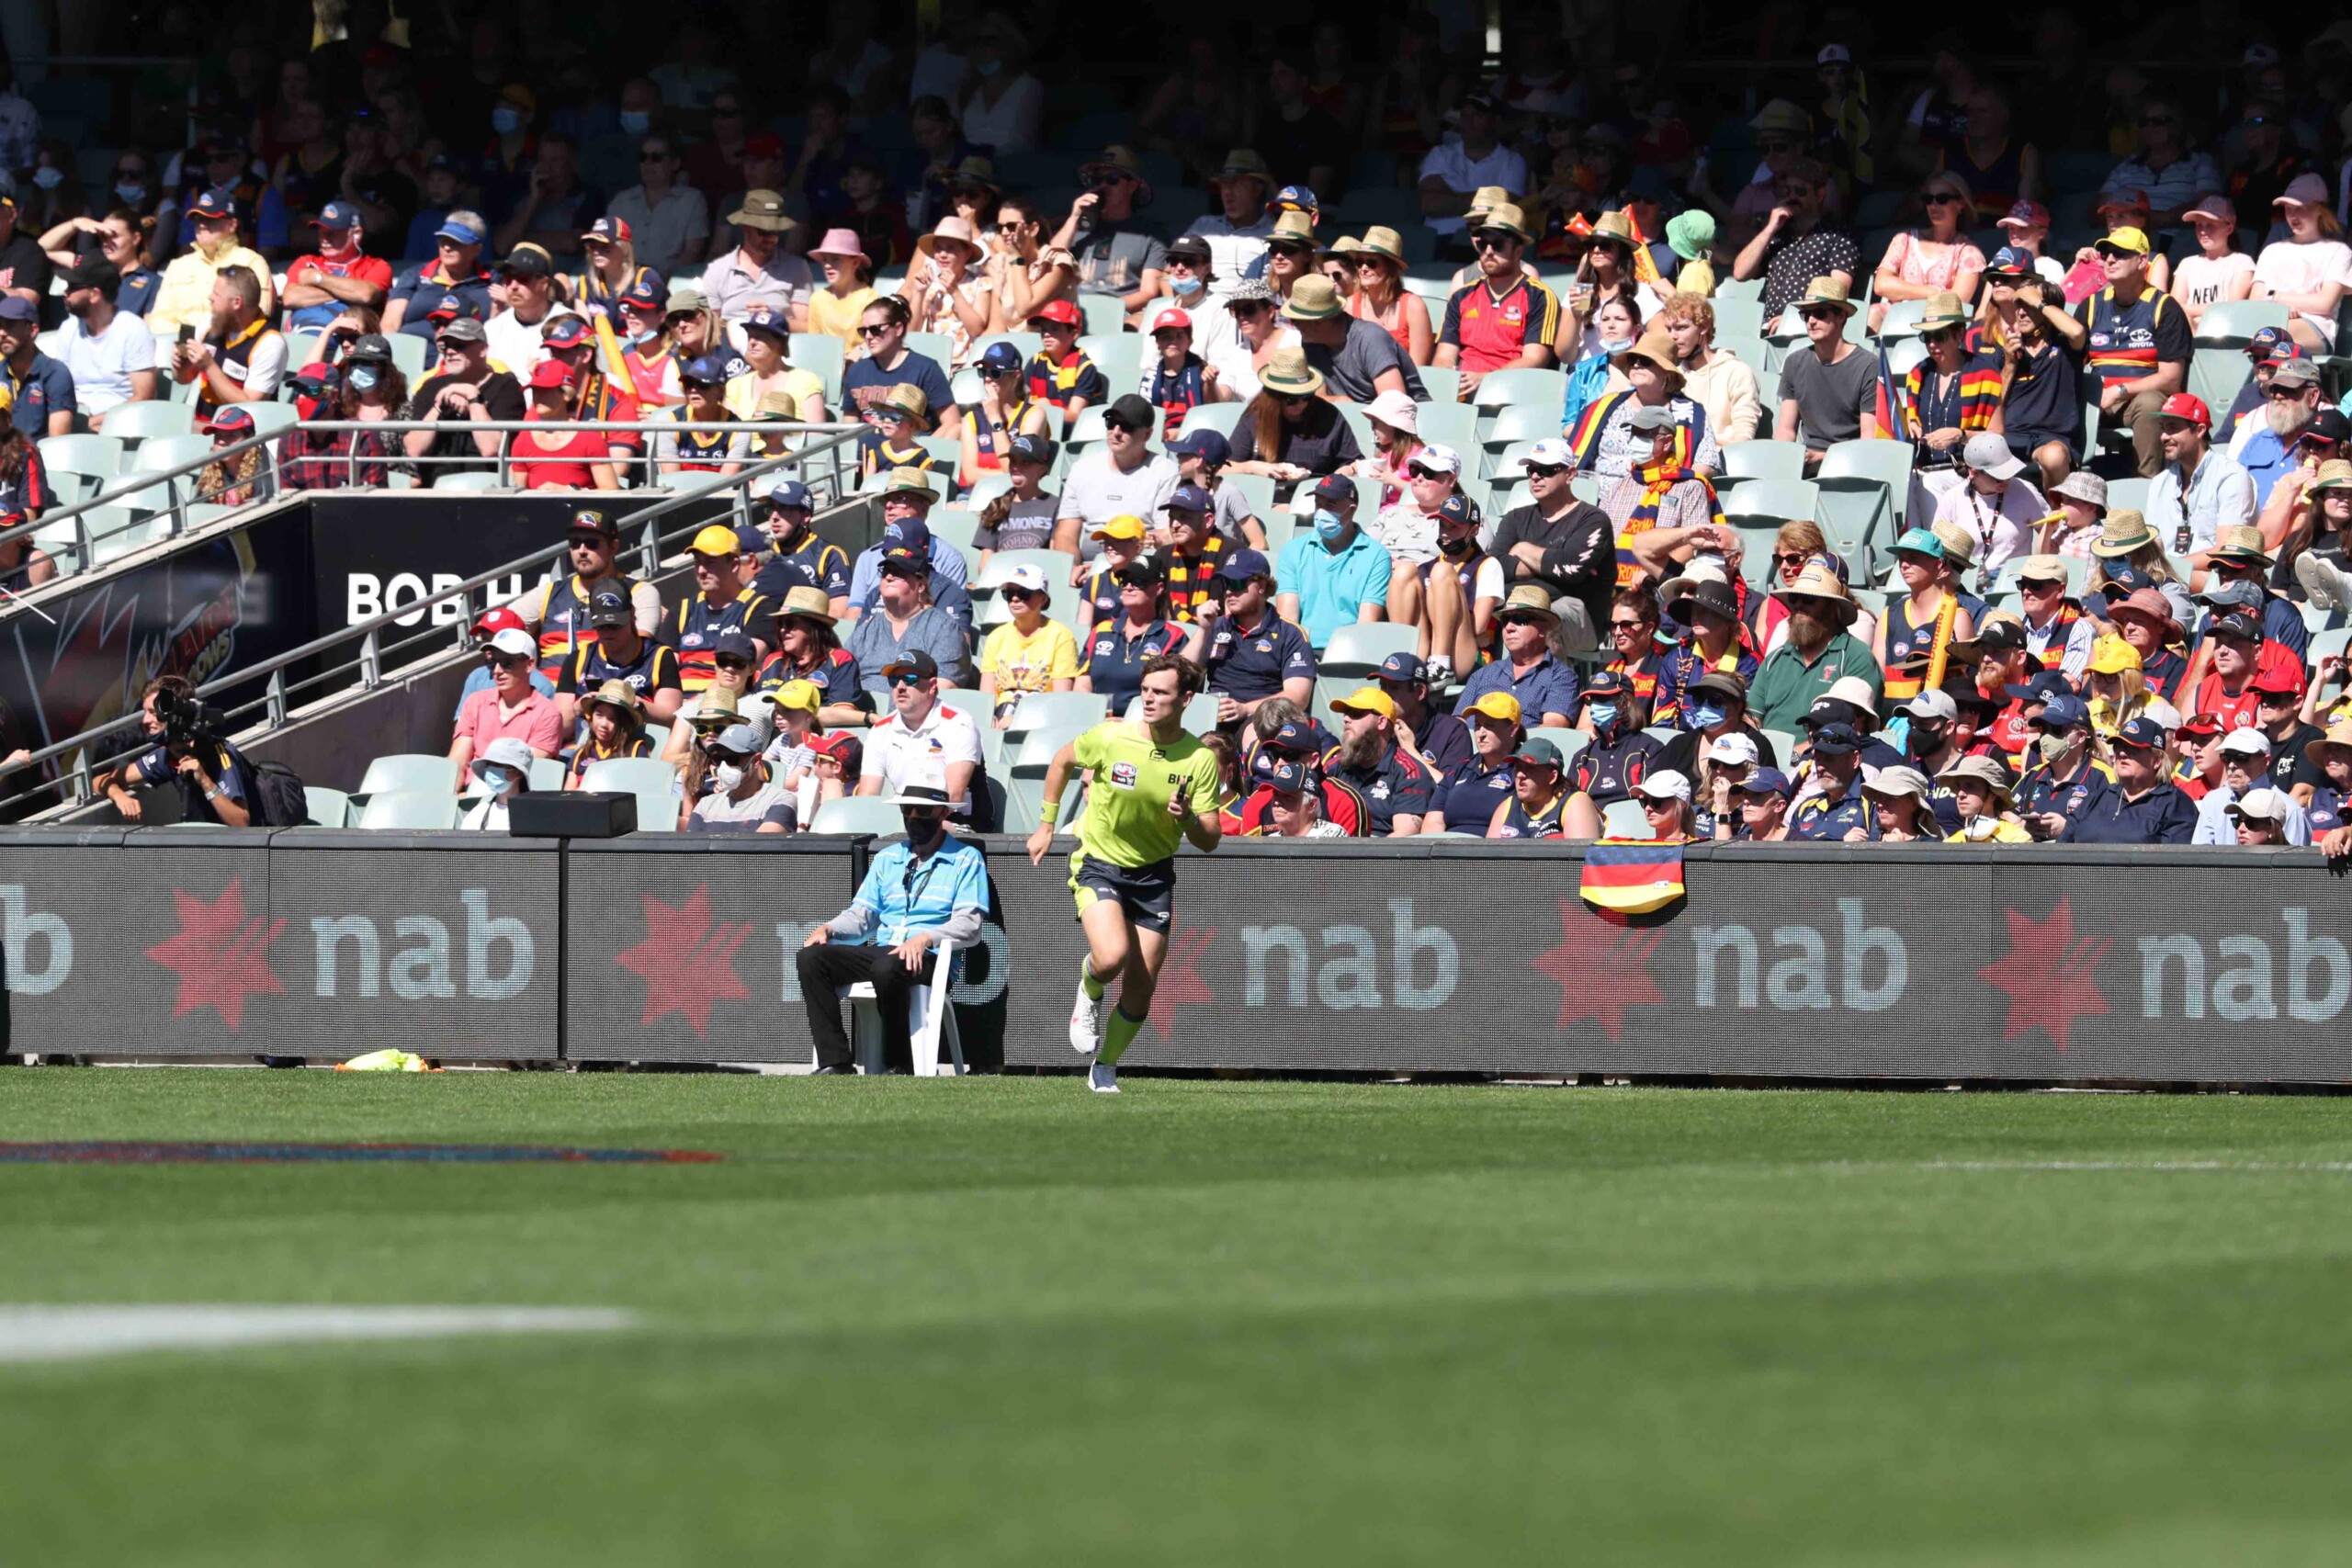 ADELAIDE, AUSTRALIA - APRIL 09: during the 2022 AFLW Grand Final match between the Adelaide Crows and the Melbourne Demons at Adelaide Oval on April 09, 2022 in Adelaide, Australia. (Photo by Sarah Reed/AFL Photos)